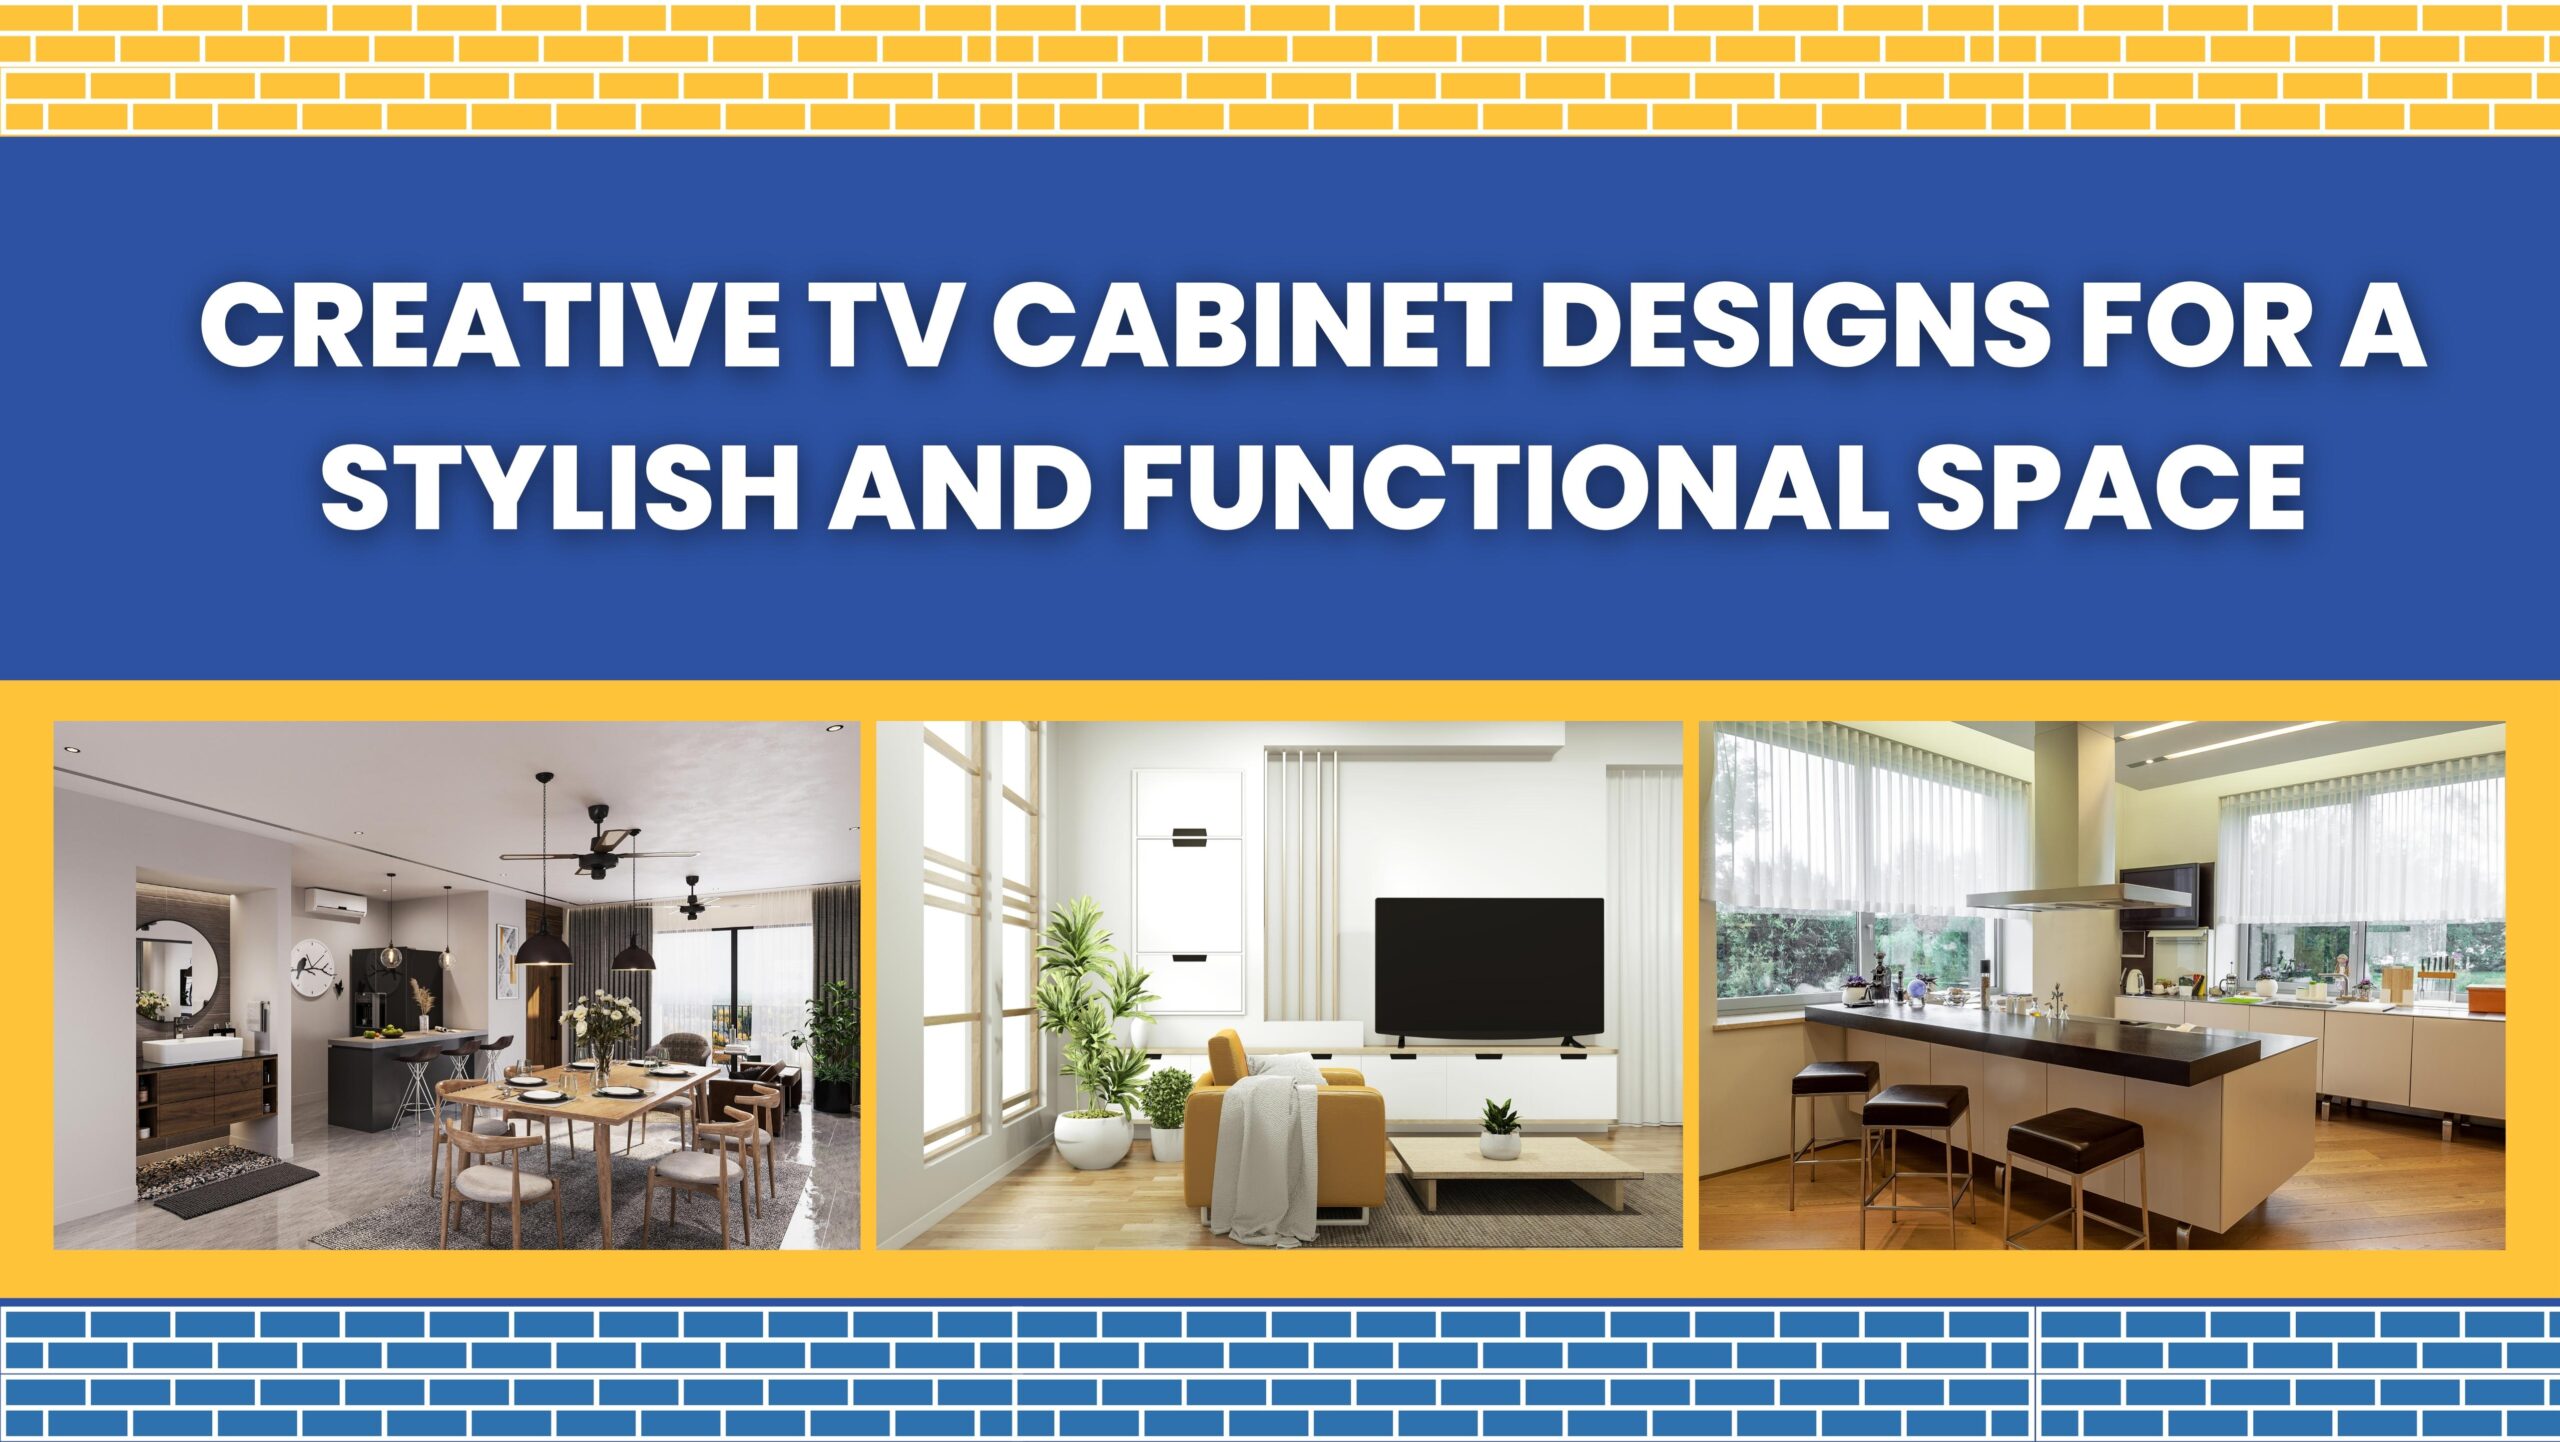 Creative TV Cabinet Designs for a Stylish and Functional Space